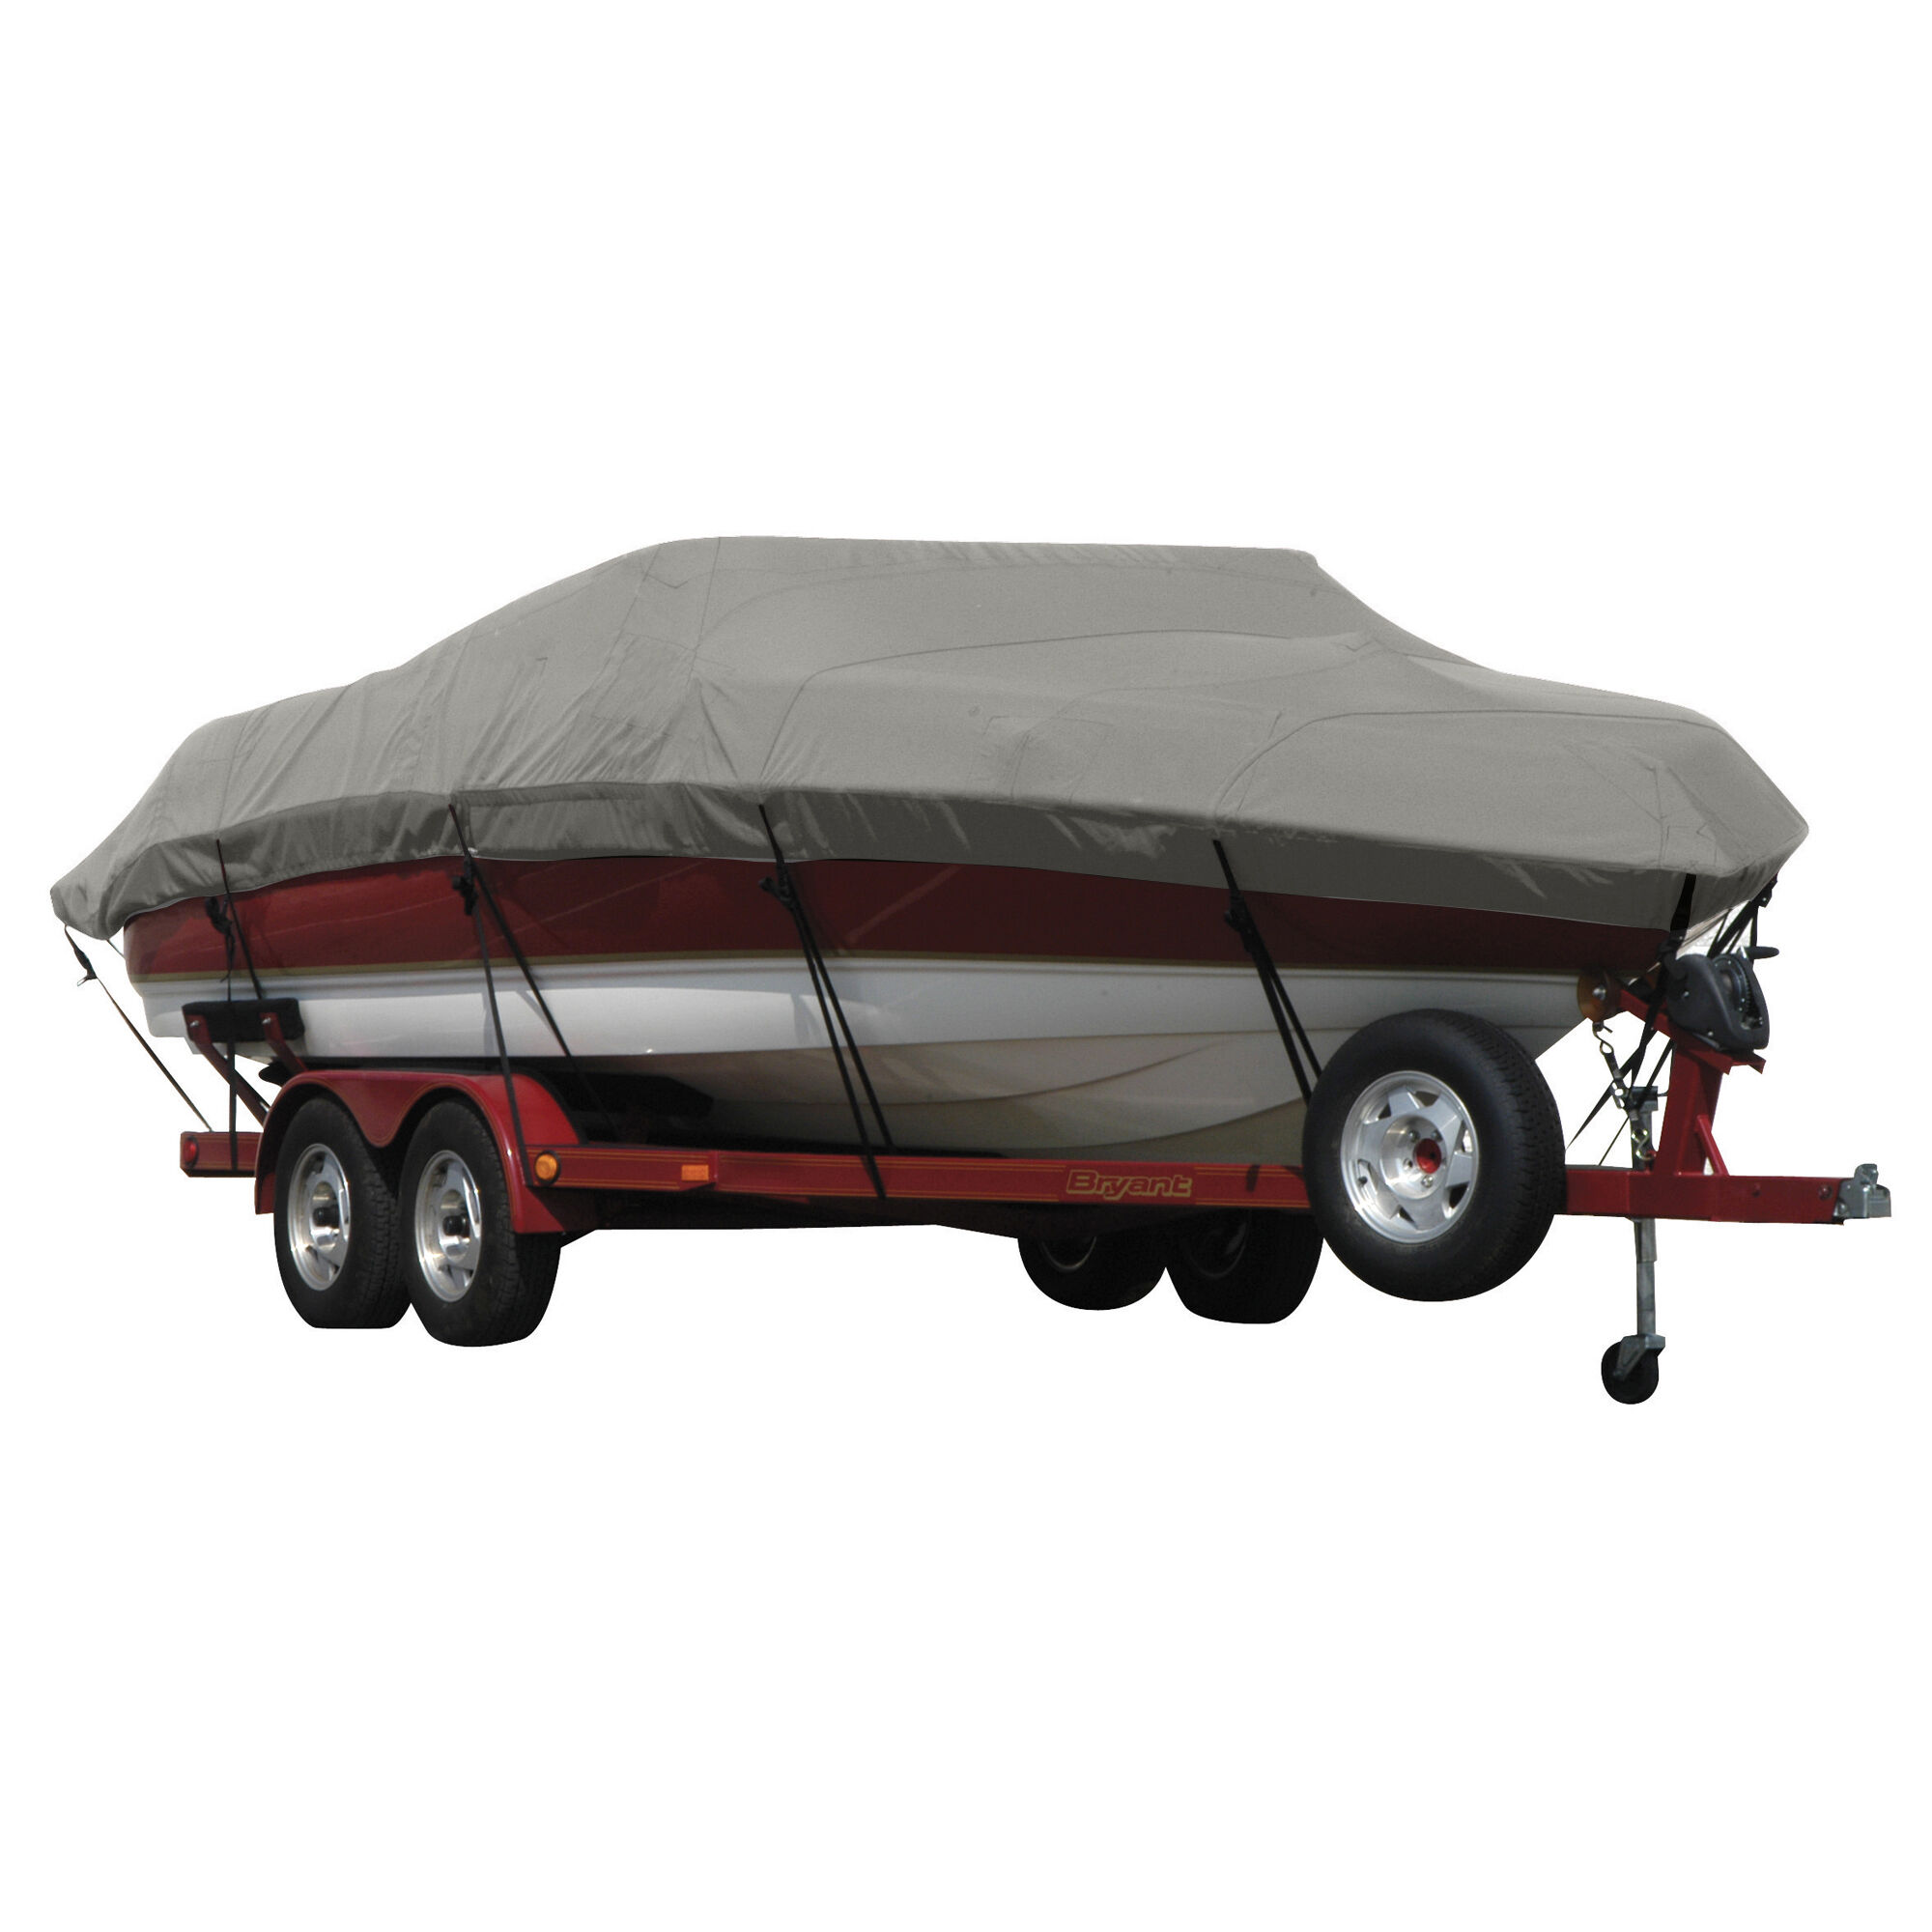 Covermate Exact Fit Sunbrella Boat Cover for Supreme V232 V232 w/ Skylon Tower Does Not Cover PLATFORMm I/O. Charcoal Grey Heather in